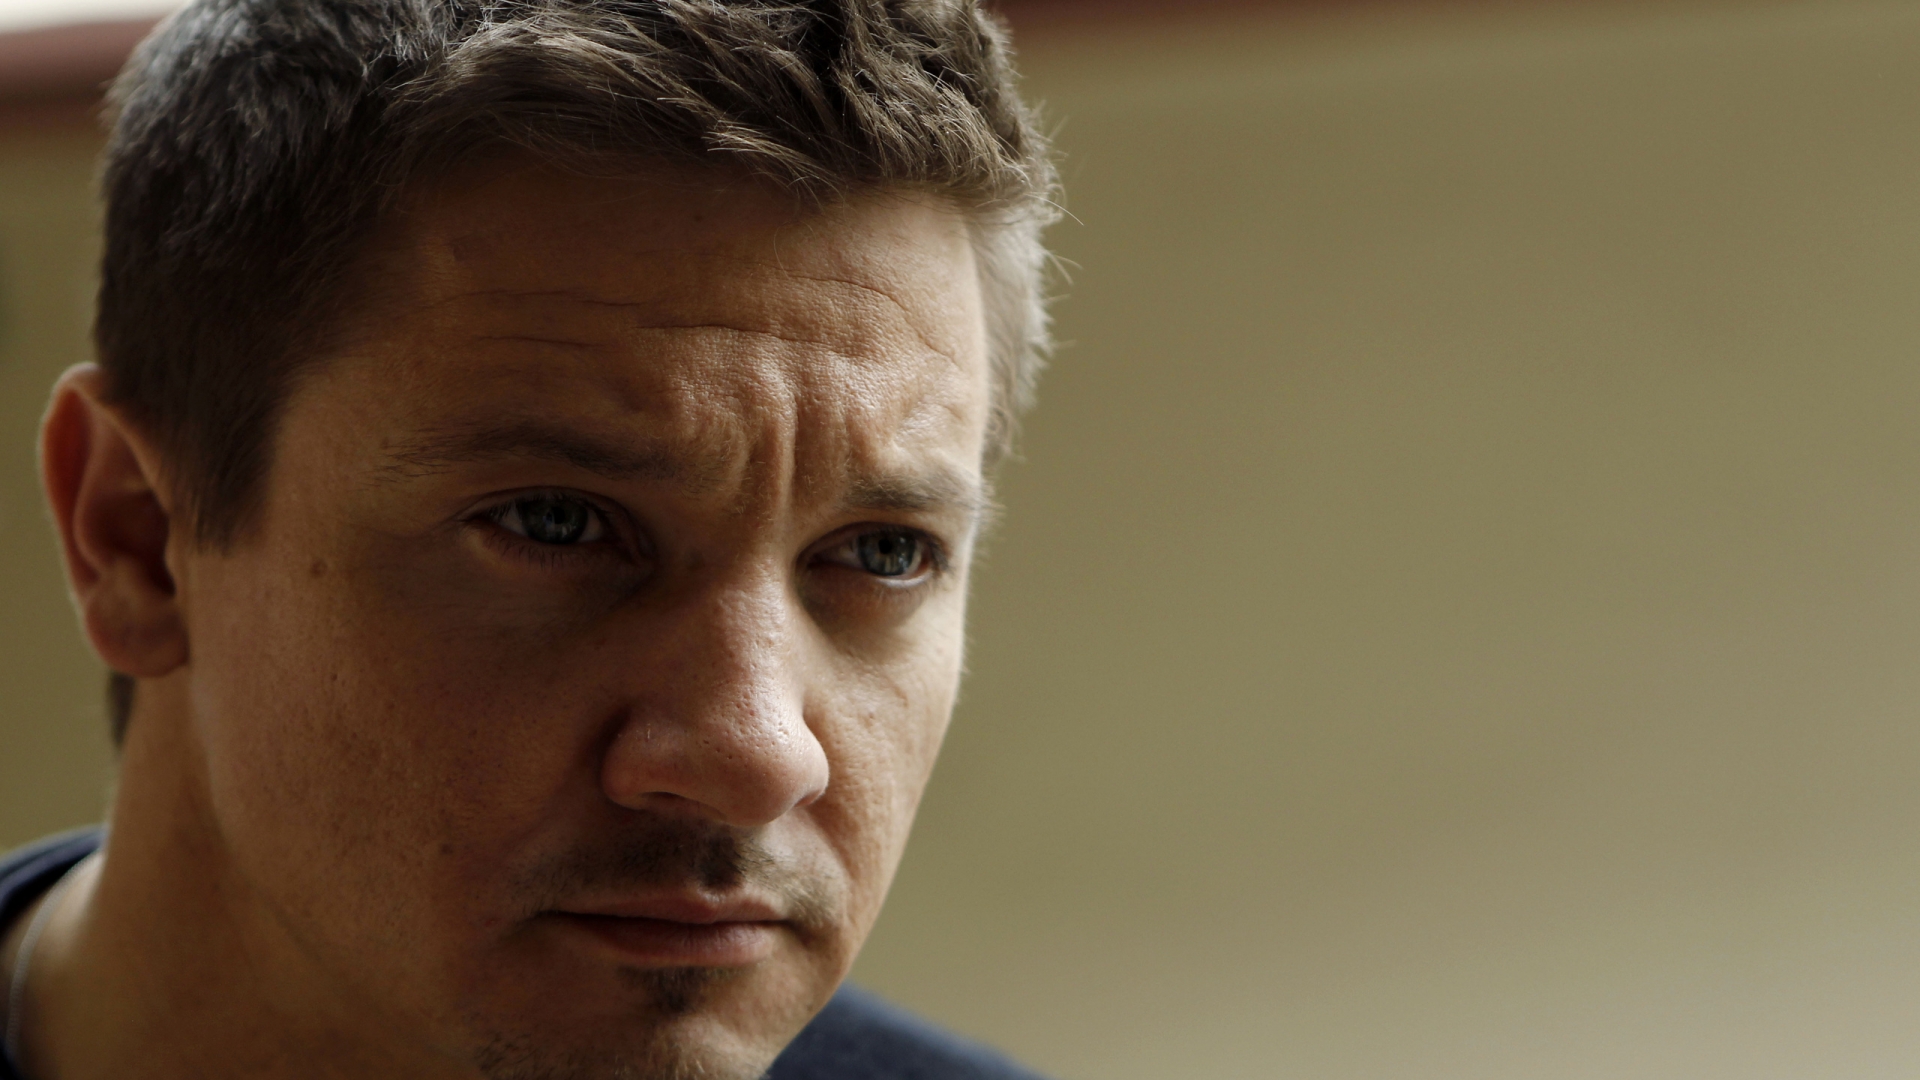 Jeremy Renner Close Up for 1920 x 1080 HDTV 1080p resolution